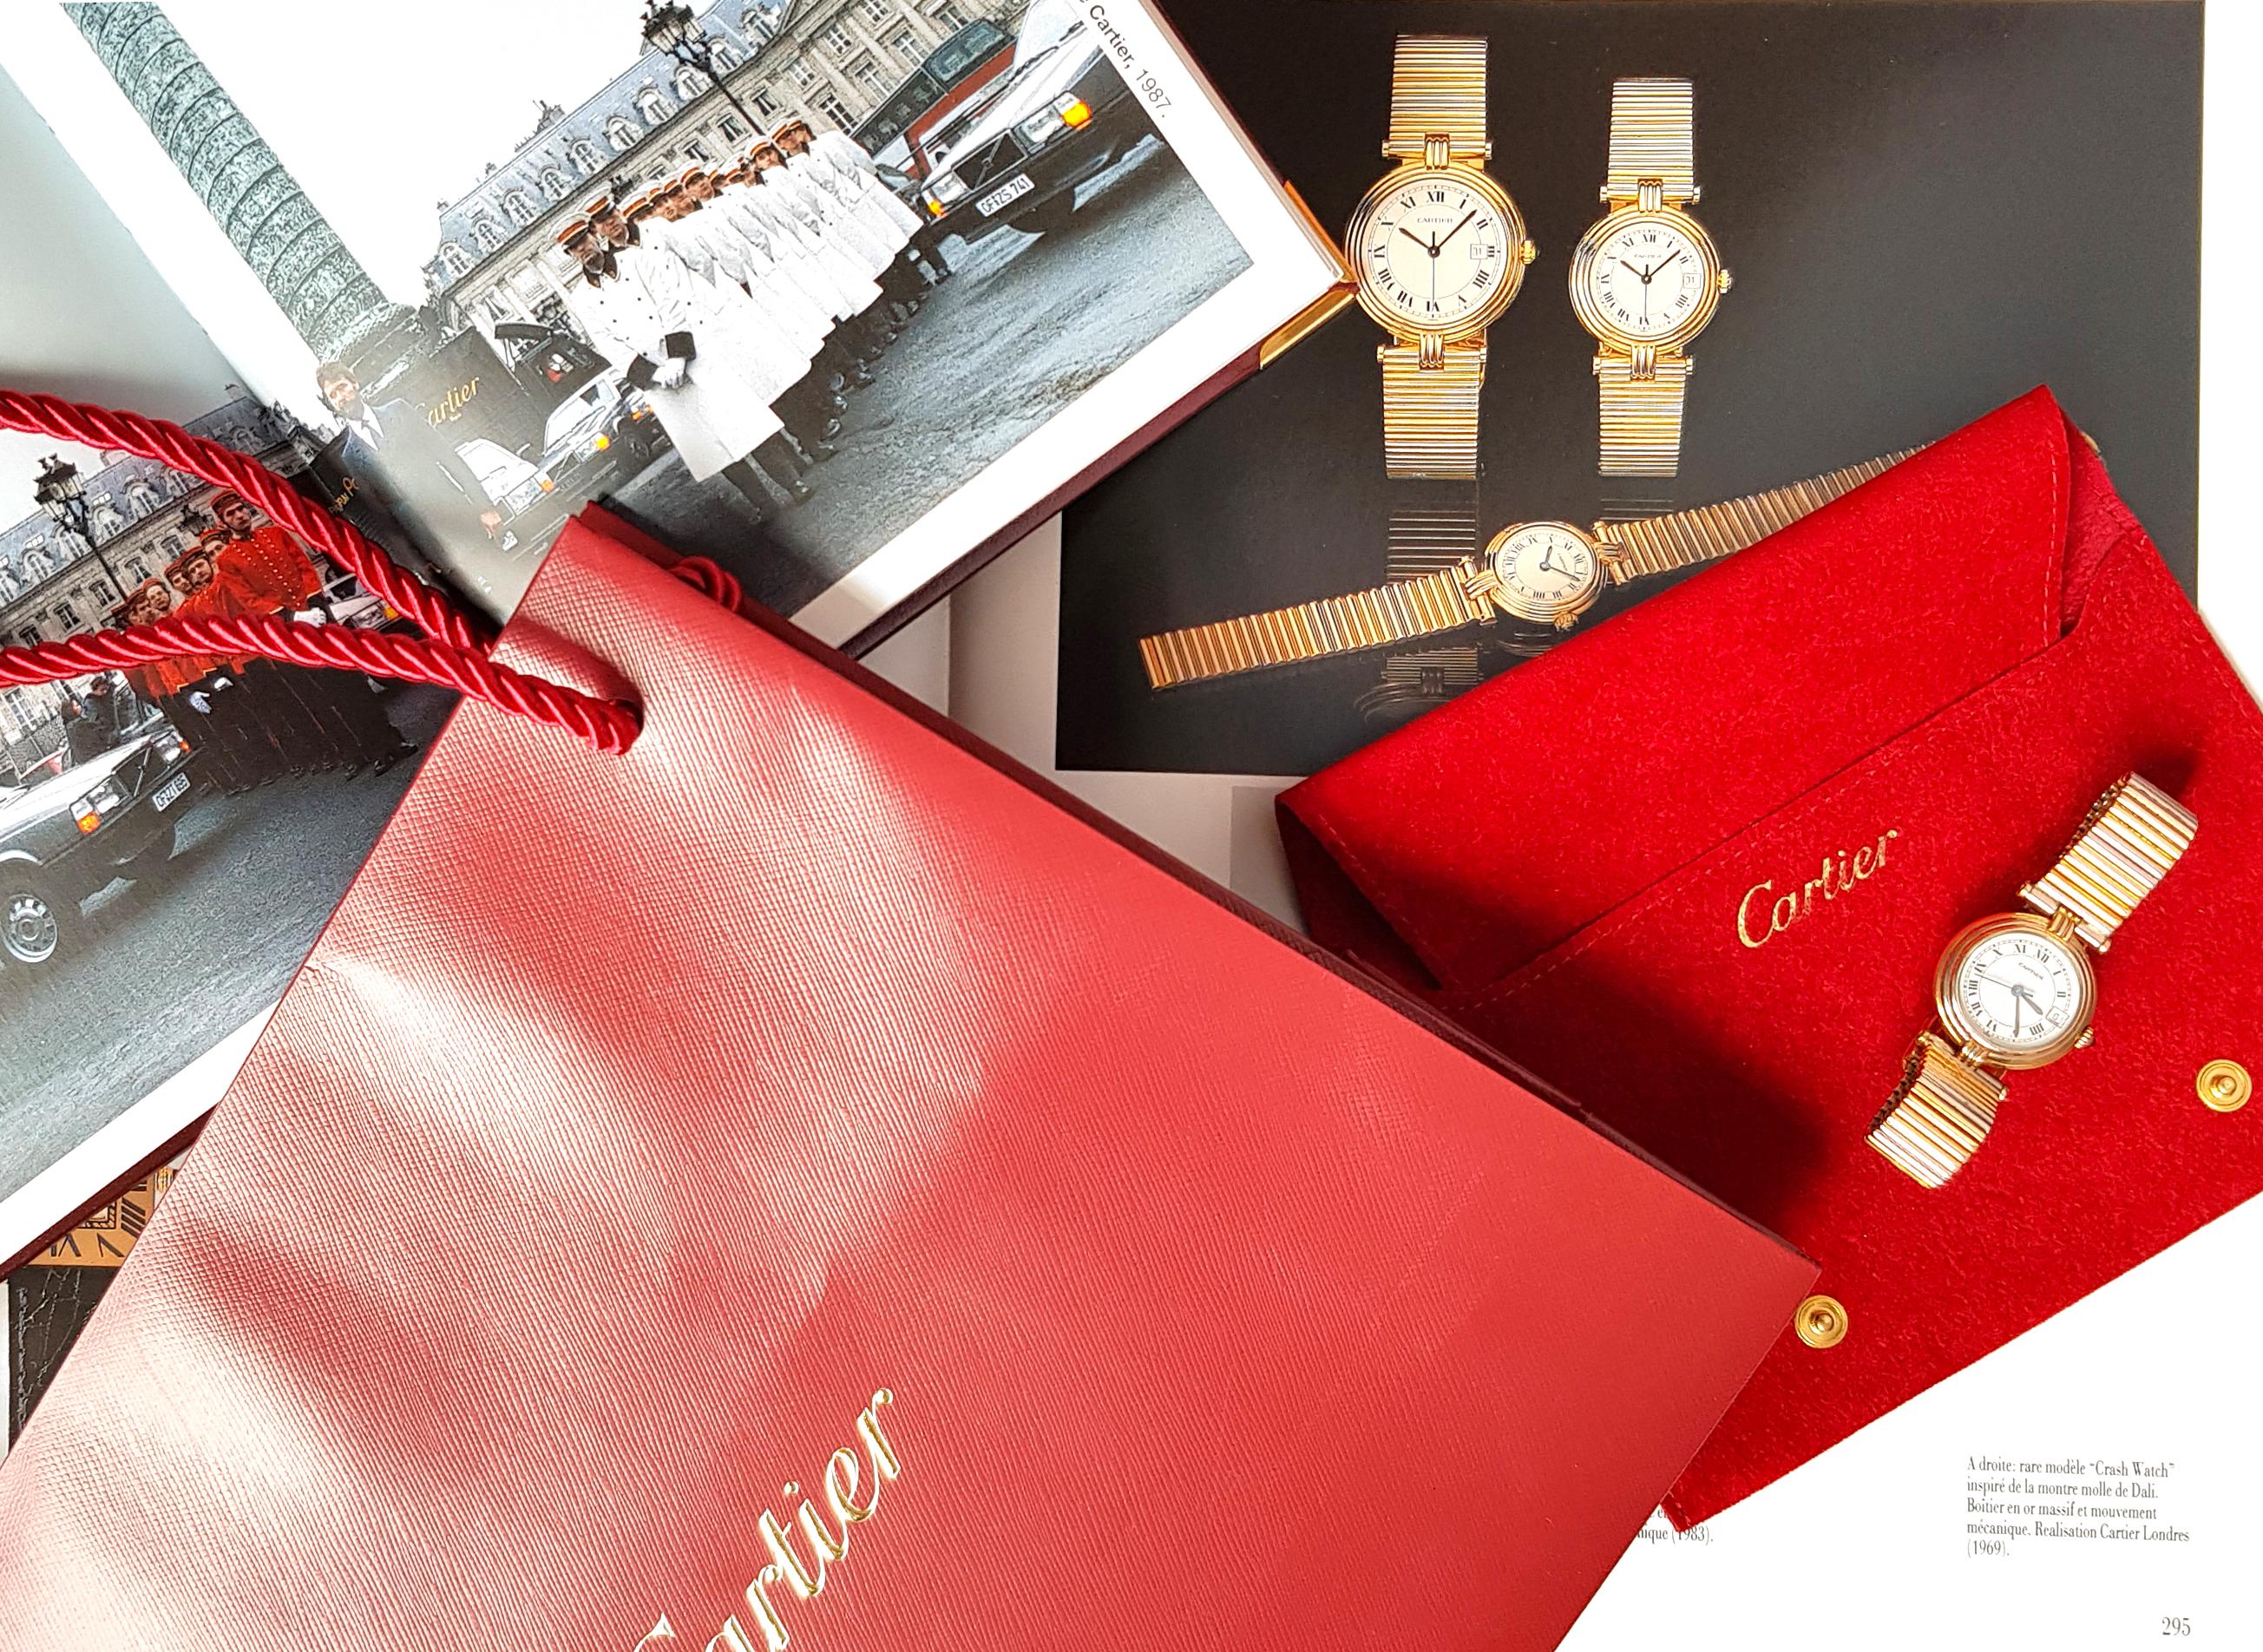 CARTIER
Founded in 1847

For the discerning ones

Wear Cartier watch it's integrate the club of famous clients : Jackie Kennedy, Princess Diana, the Duchess of Windsor, Princess Grace, Barbara Hutton, Elizabeth Taylor, Andy Warhol, Yves Saint